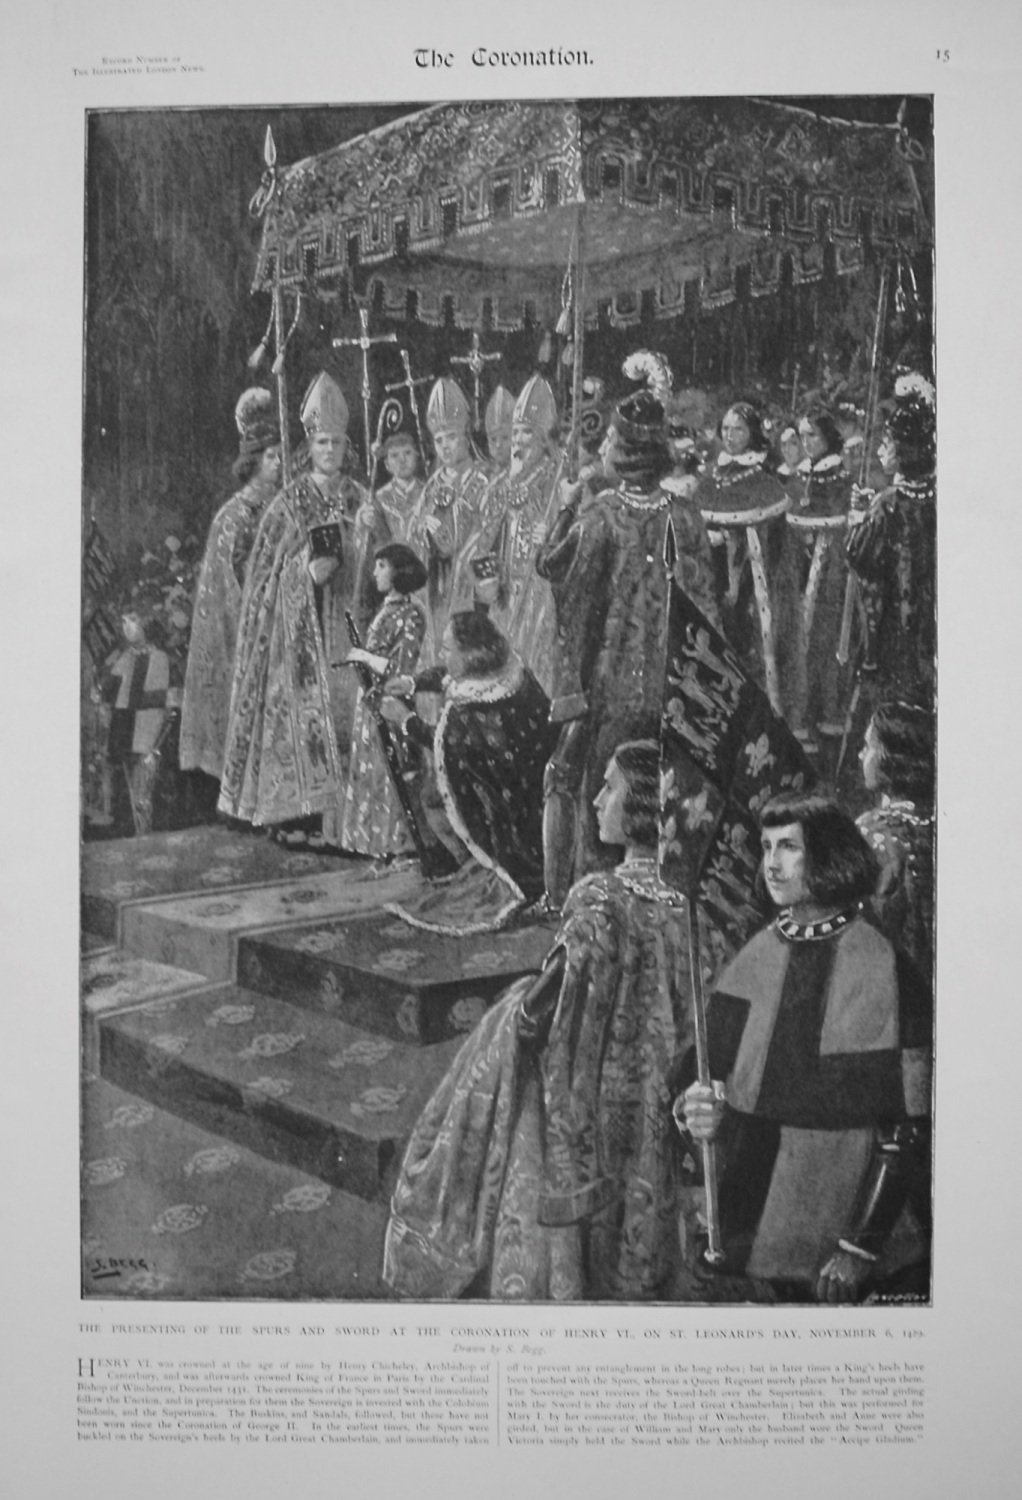 The Presenting of the Spurs and Sword at the Coronation of Henry VI., on St